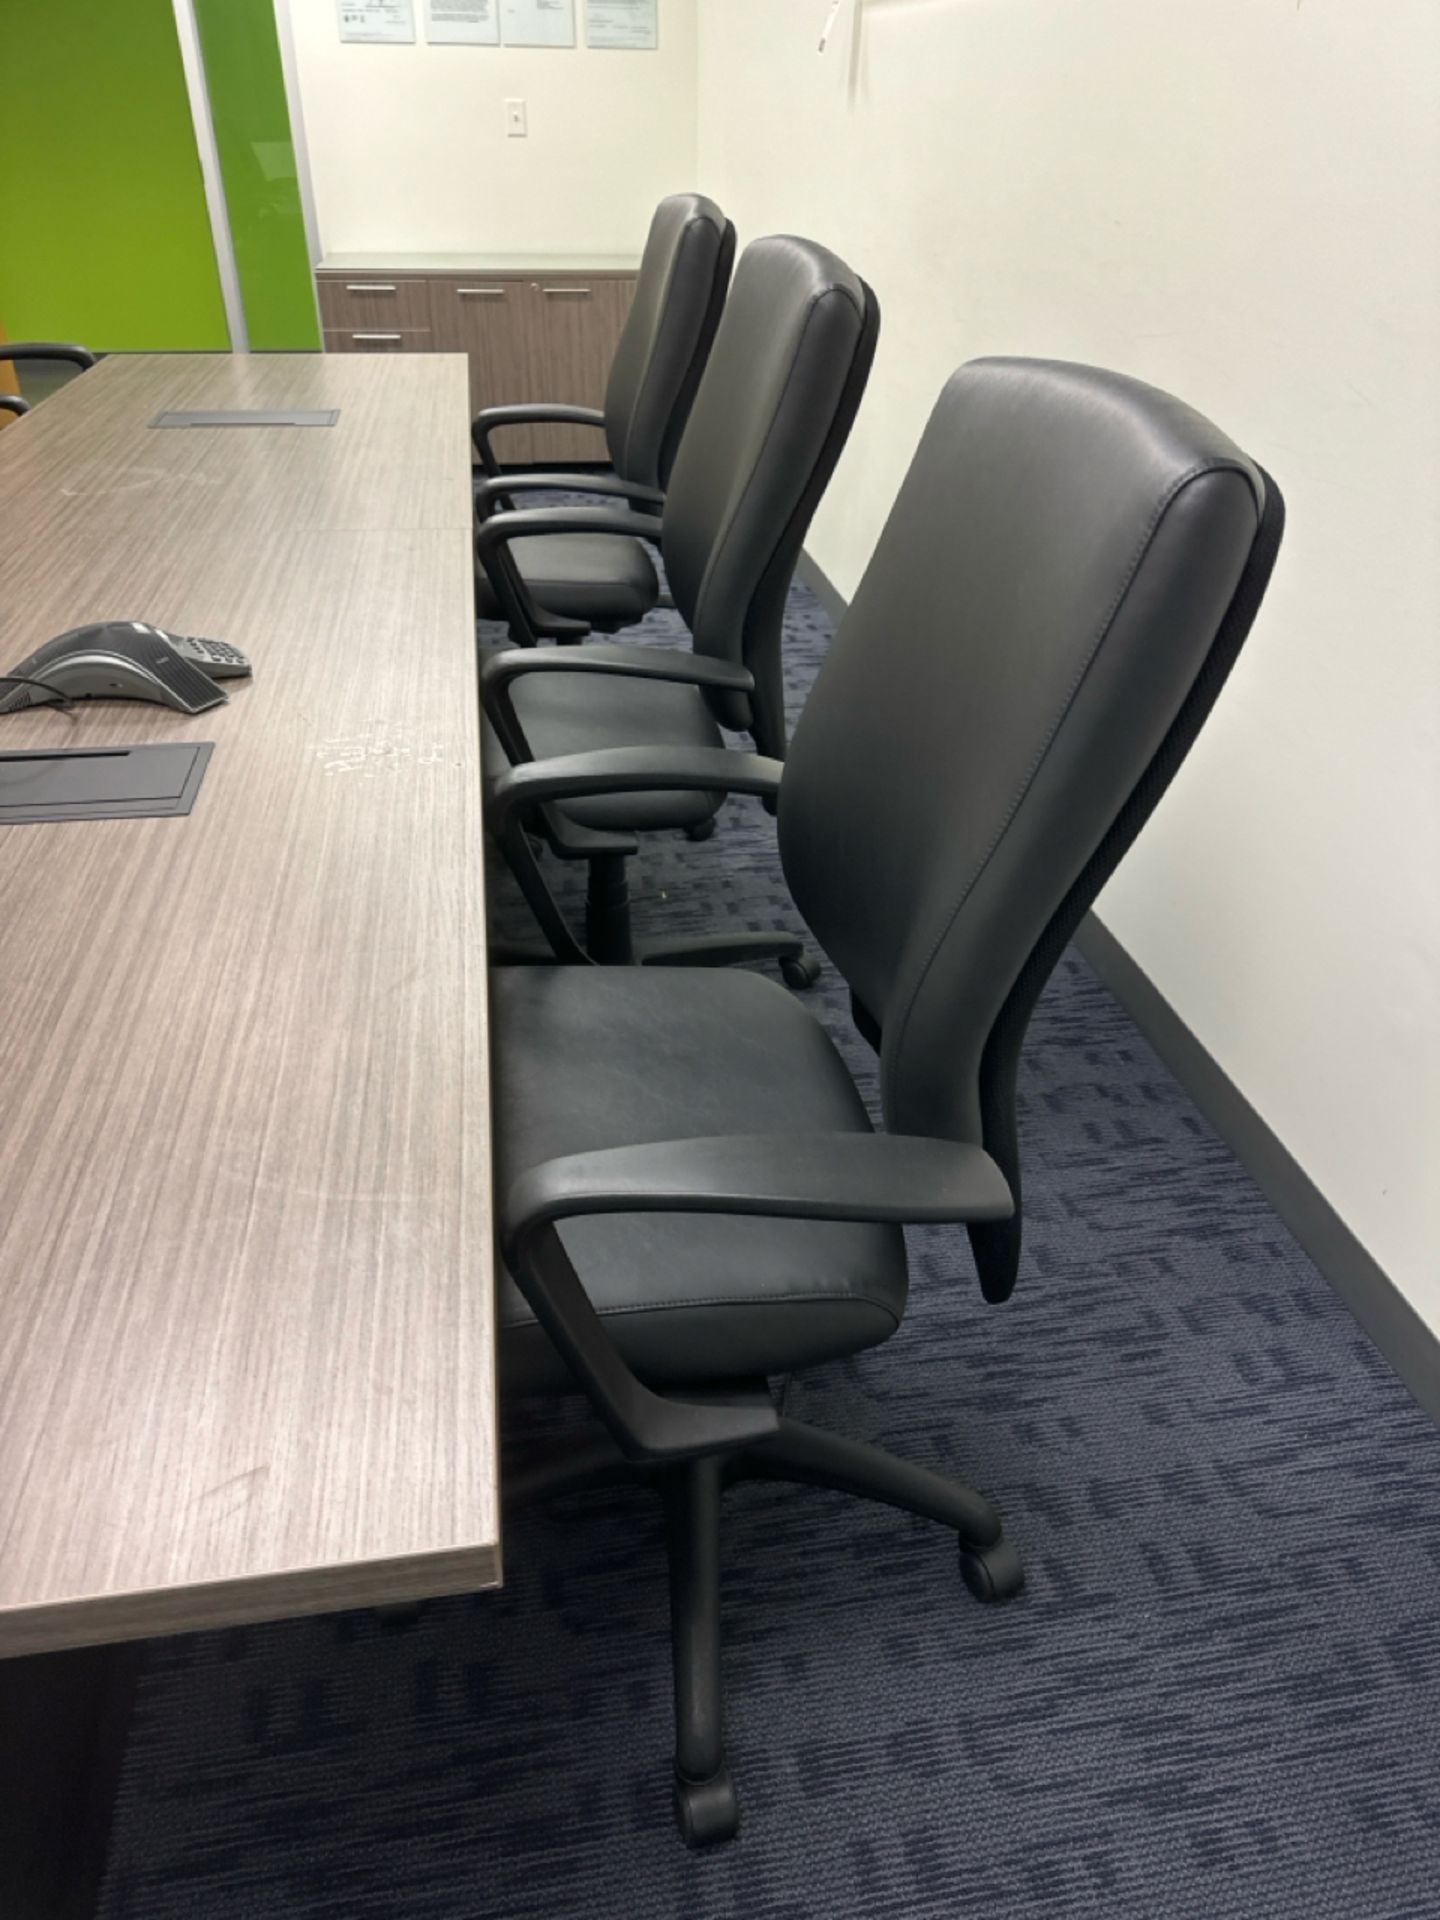 Contents of VIP Conference Room 2 - Image 4 of 11